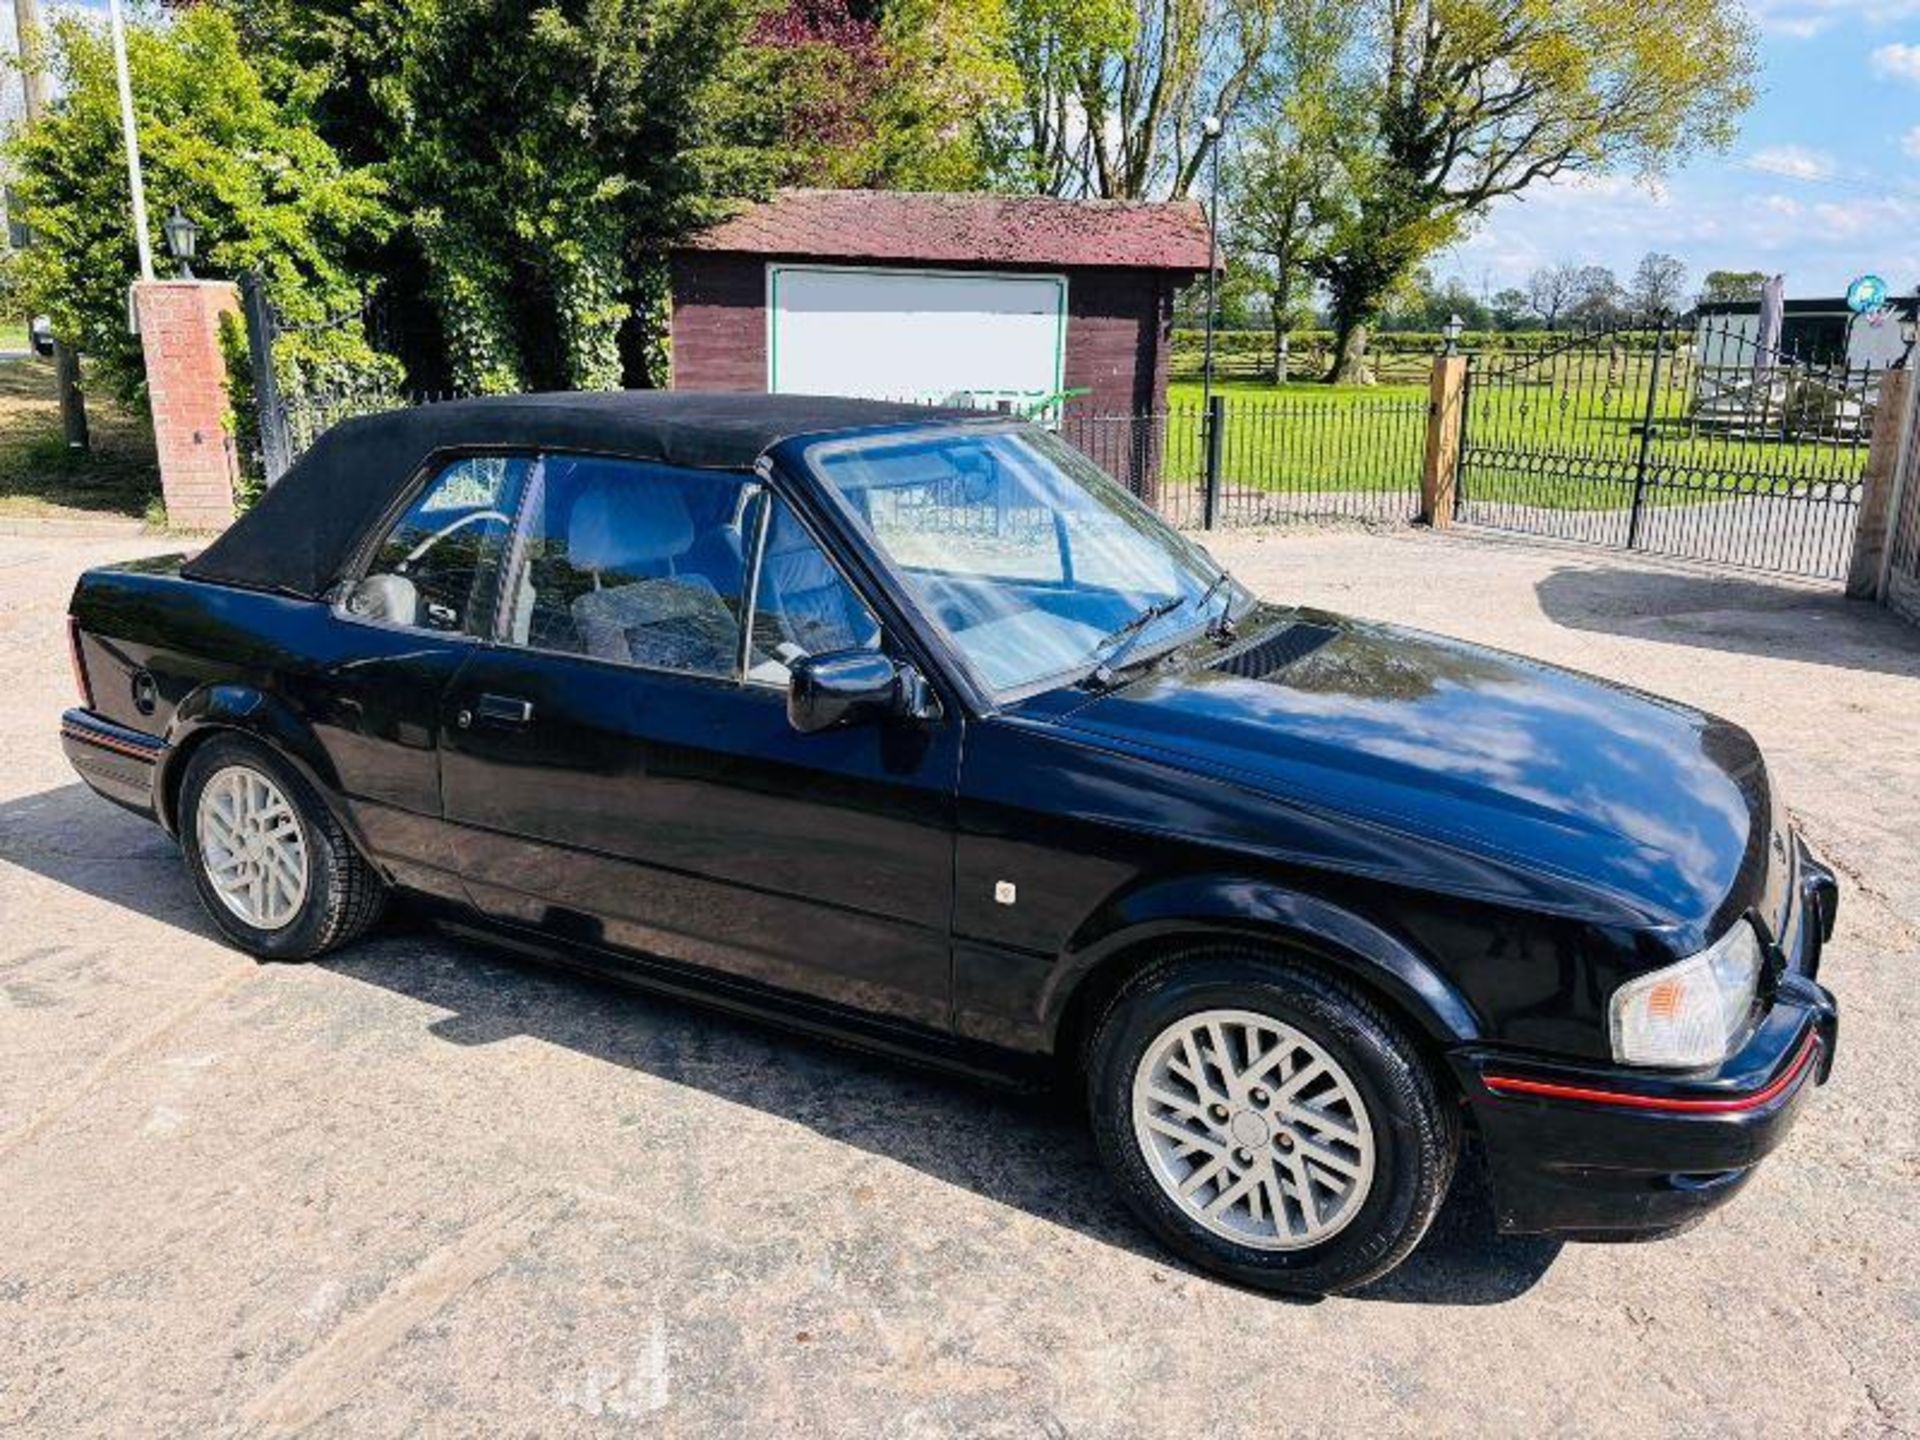 FORD ESCORT 1.6I CABRIOLET *YEAR 1989, 44119 MILES* - Image 17 of 20